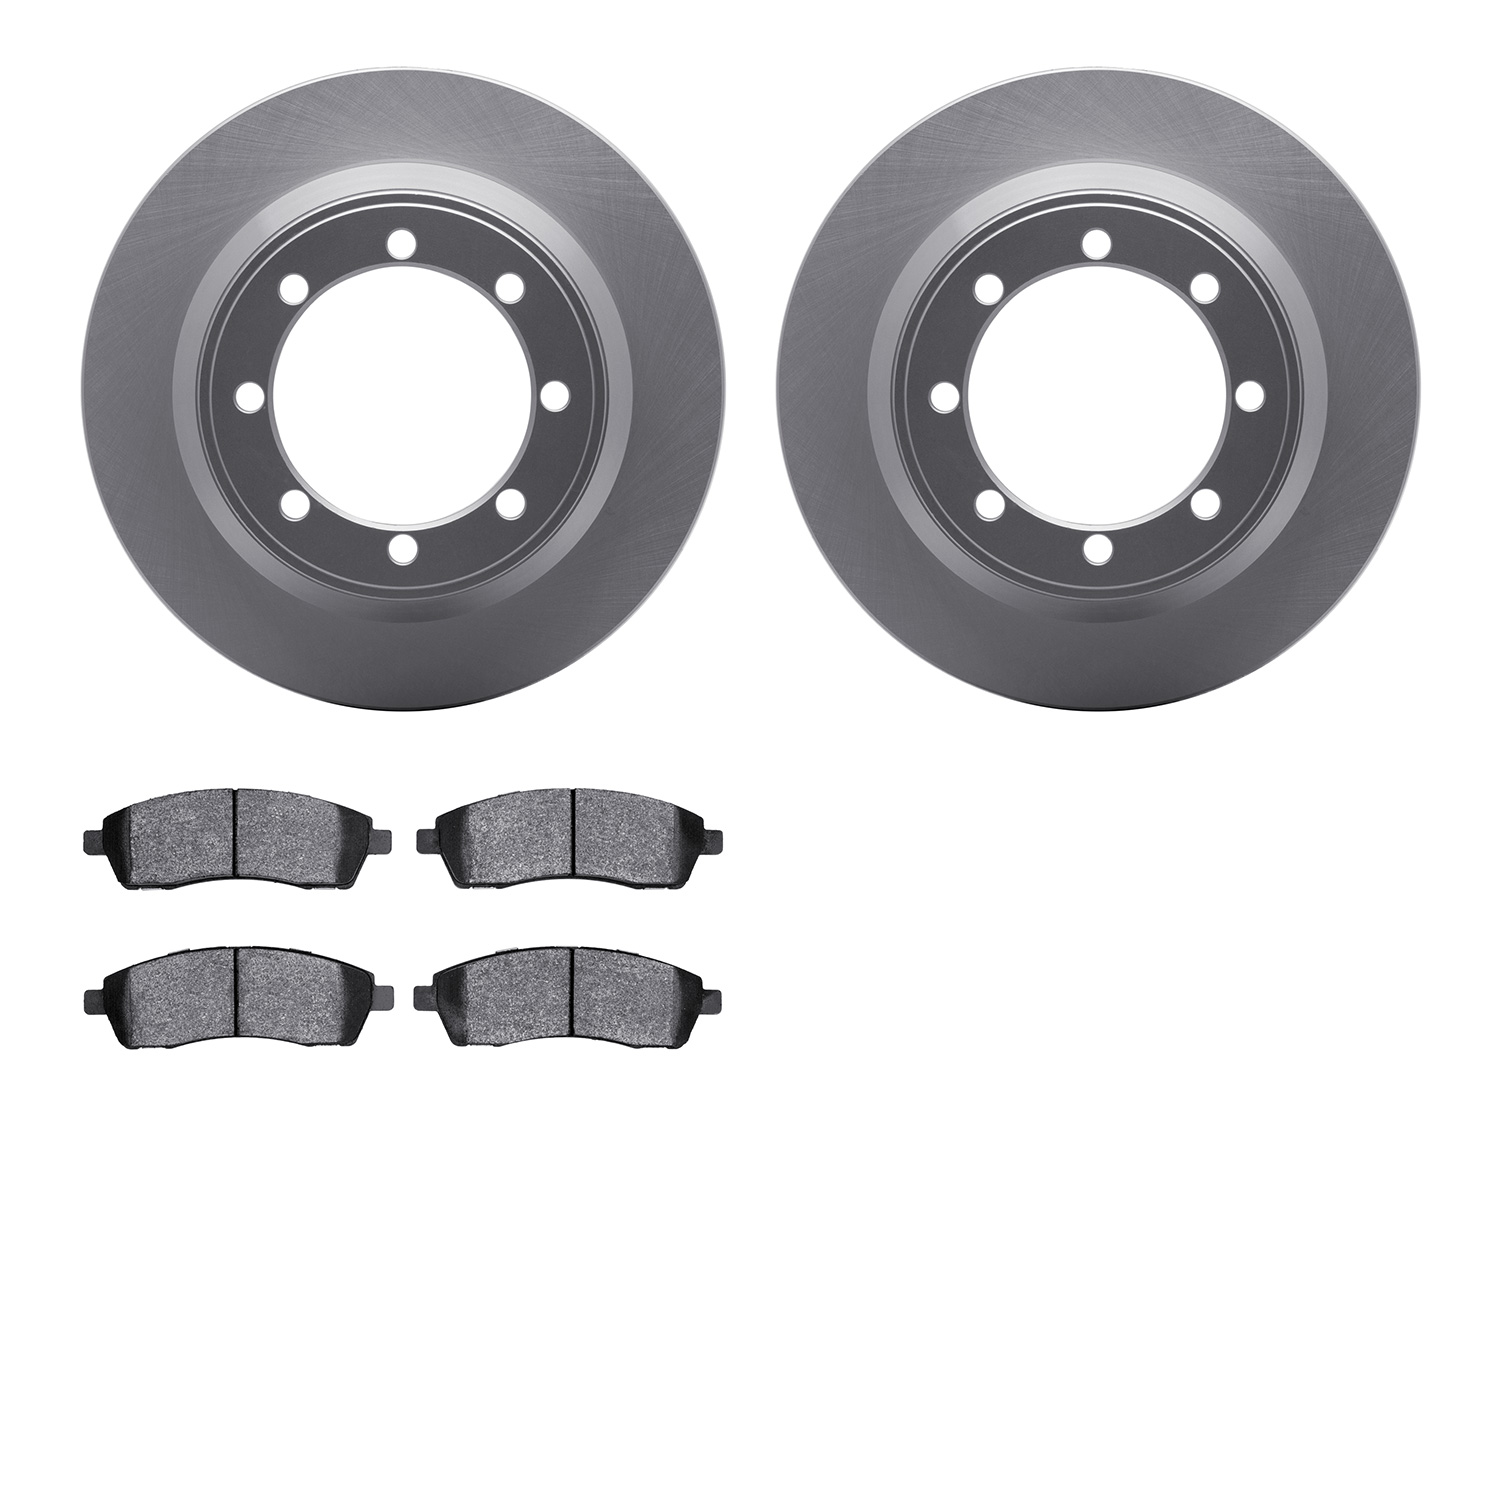 4402-54023 Geospec Brake Rotors with Ultimate-Duty Brake Pads Kit, 1999-2004 Ford/Lincoln/Mercury/Mazda, Position: Rear